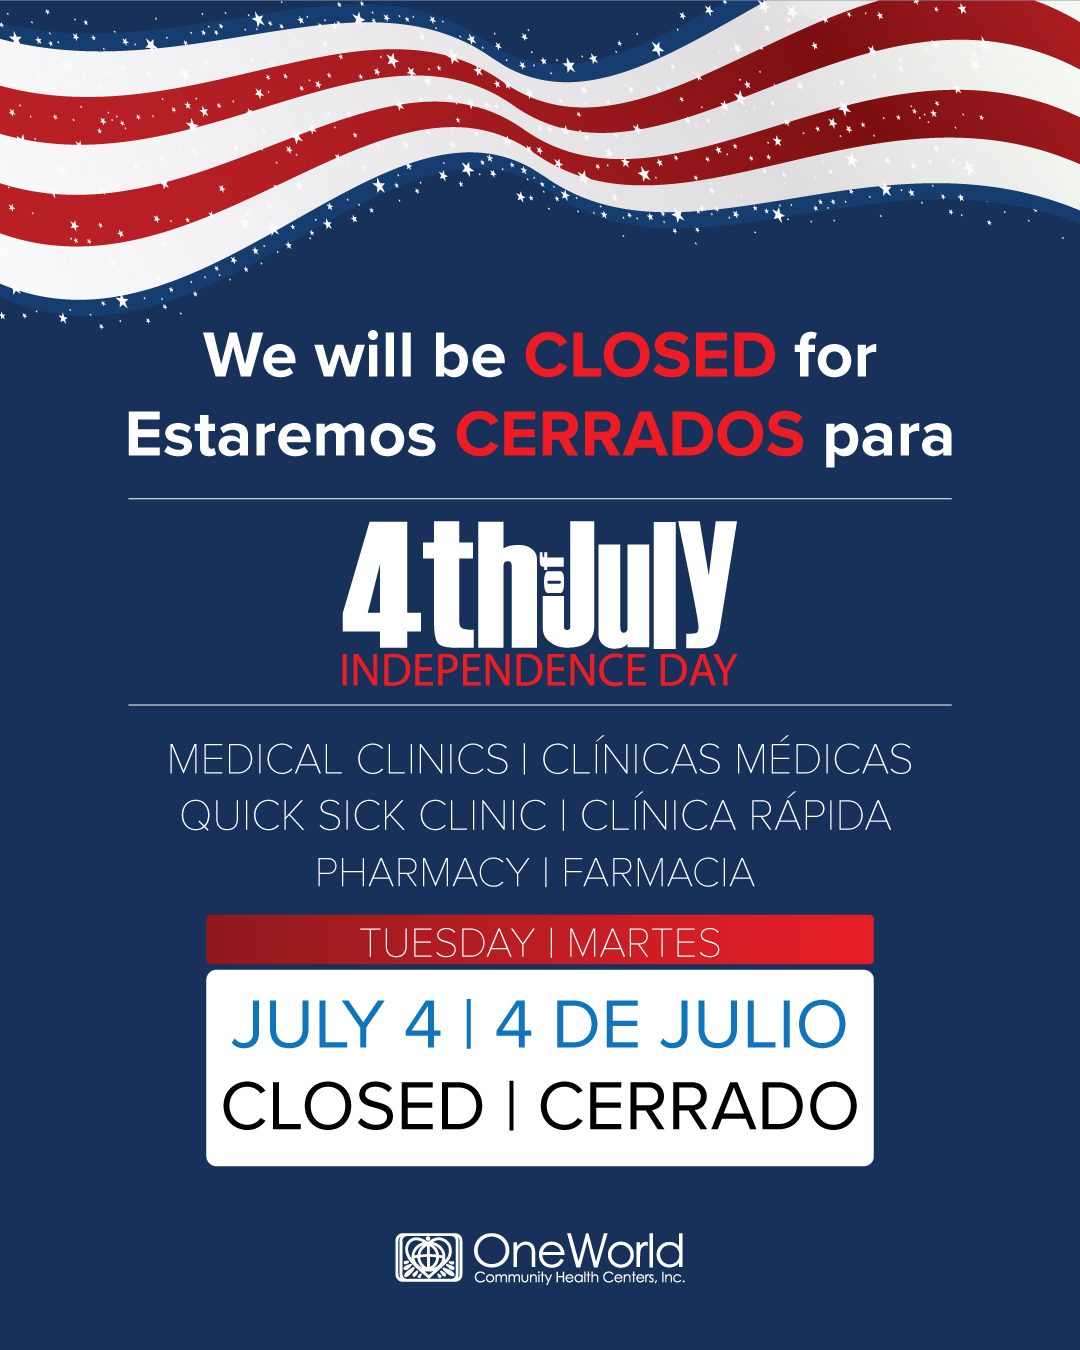 Fourth of July closing notice image